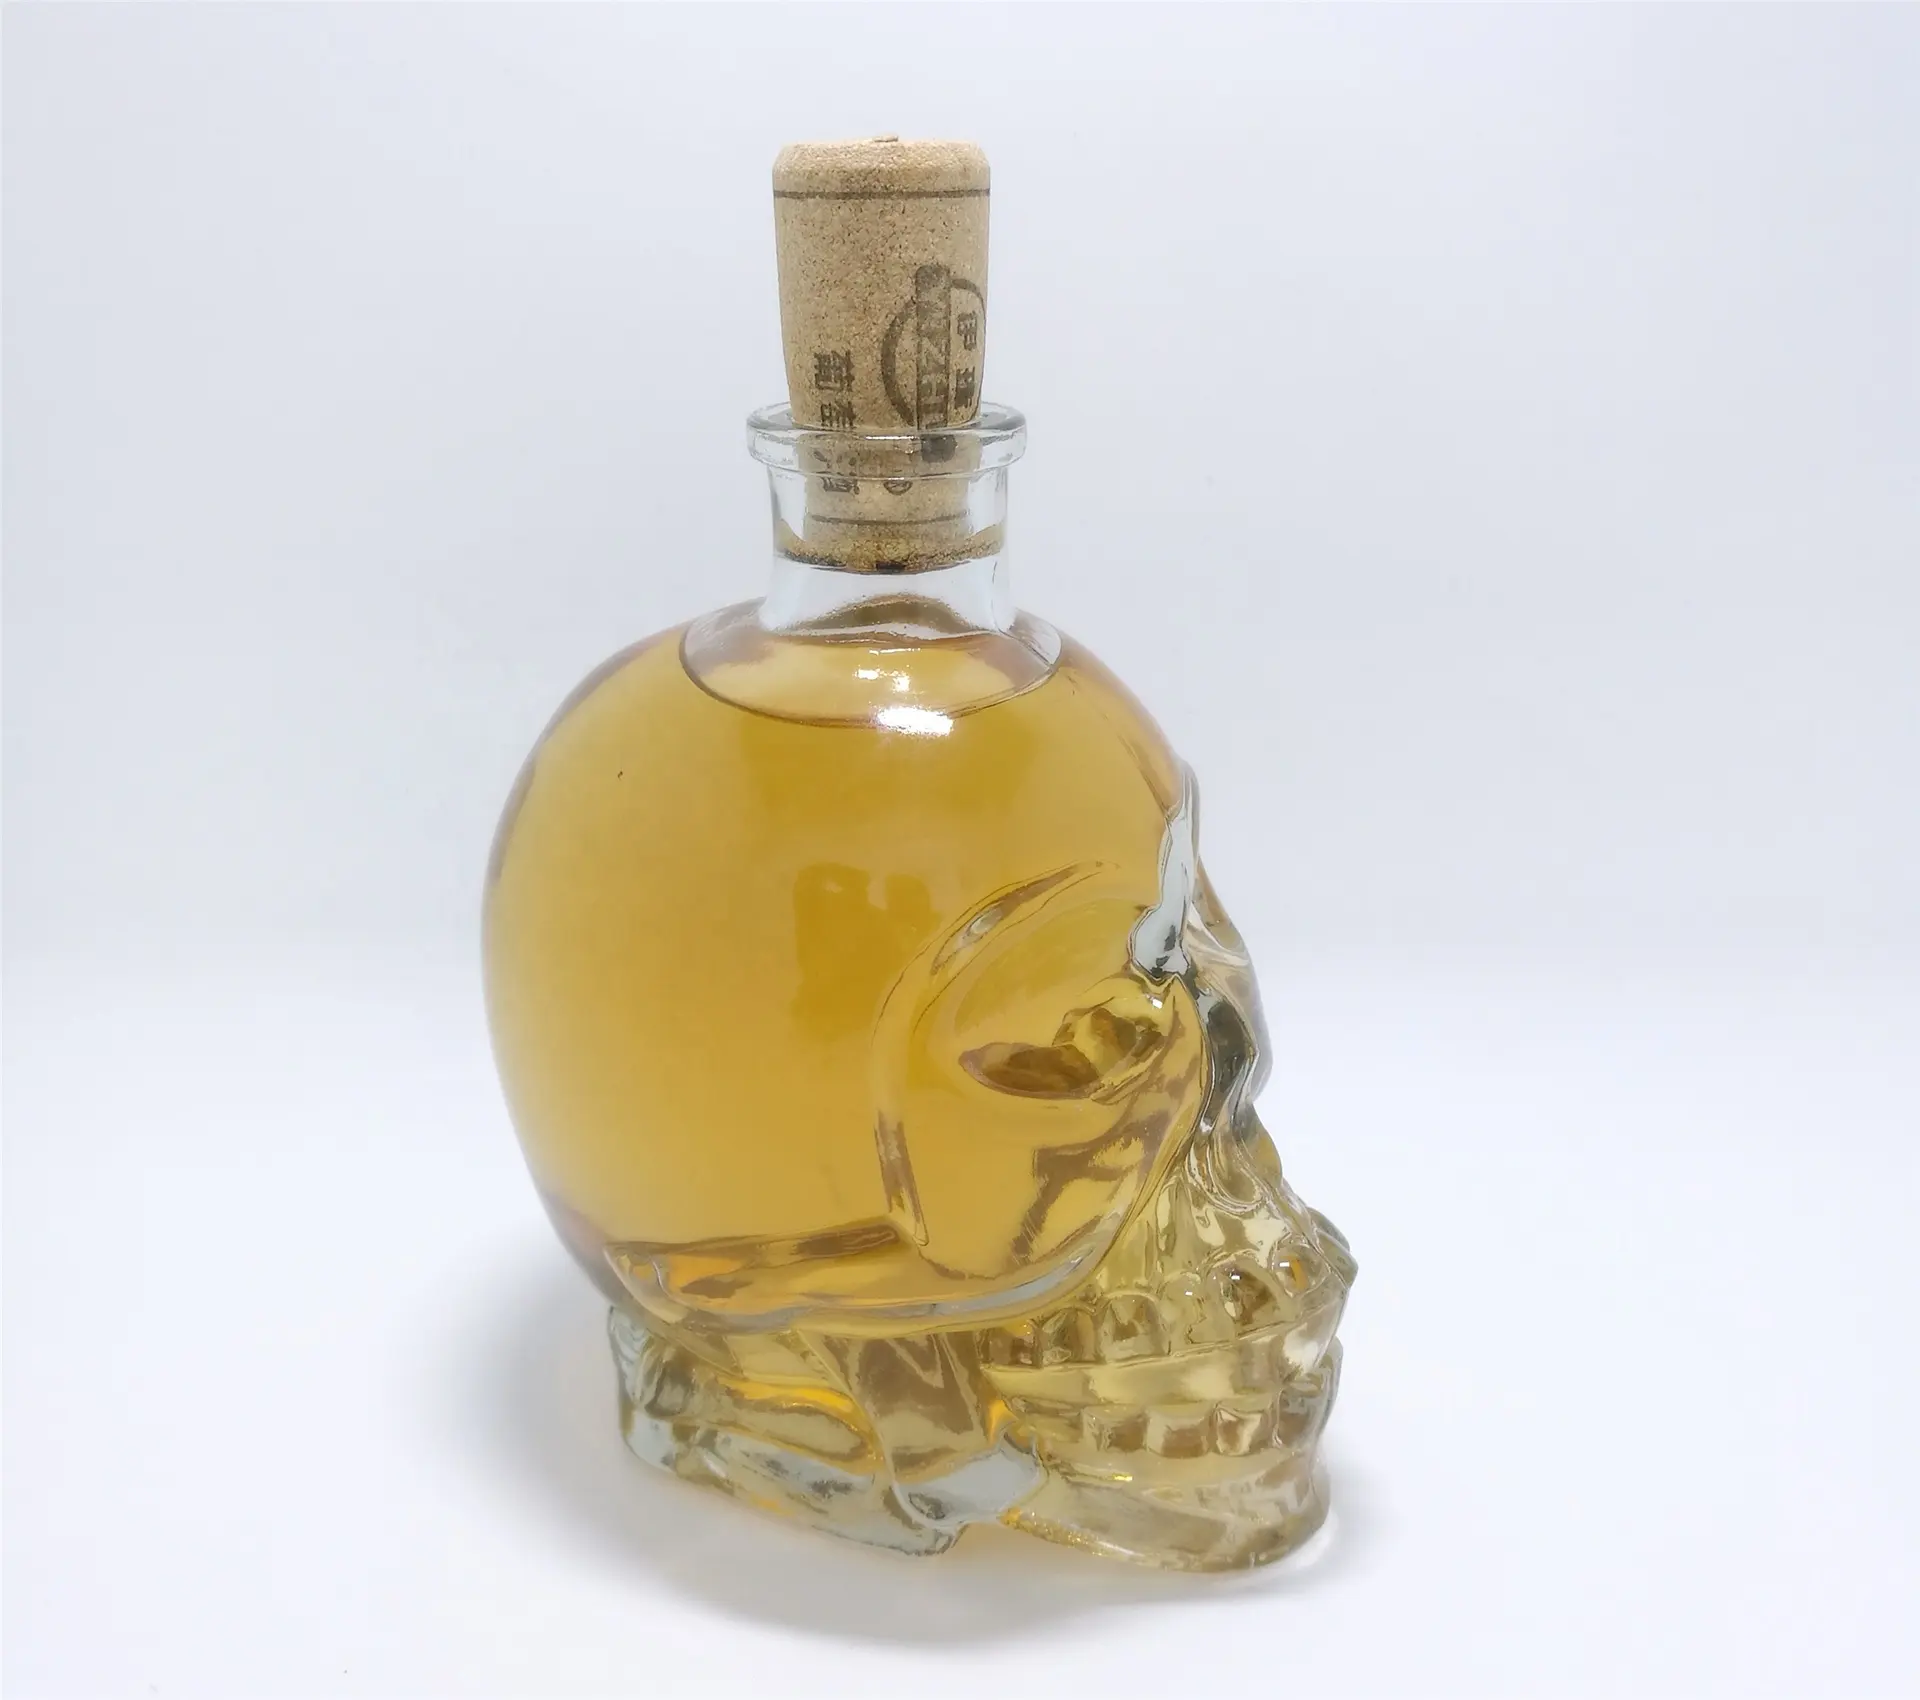 Machine Made Cheap Skull Head Shaped Glass Decanter With Cork Stopper